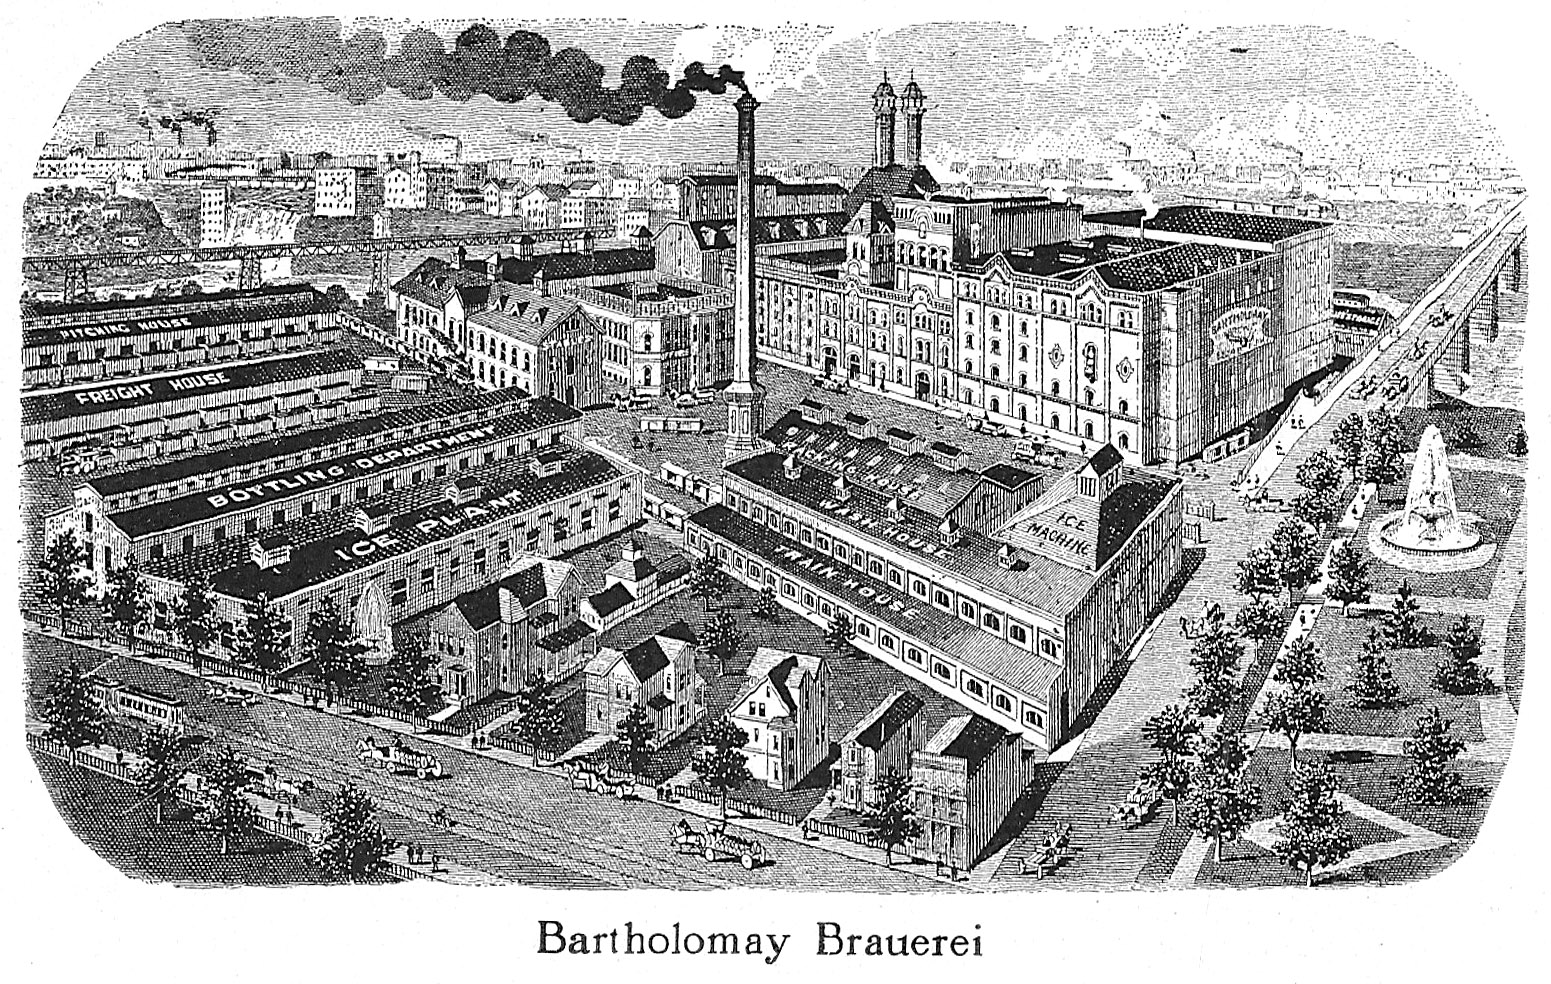 Bausch & Lomb - Bartholomay Brewery